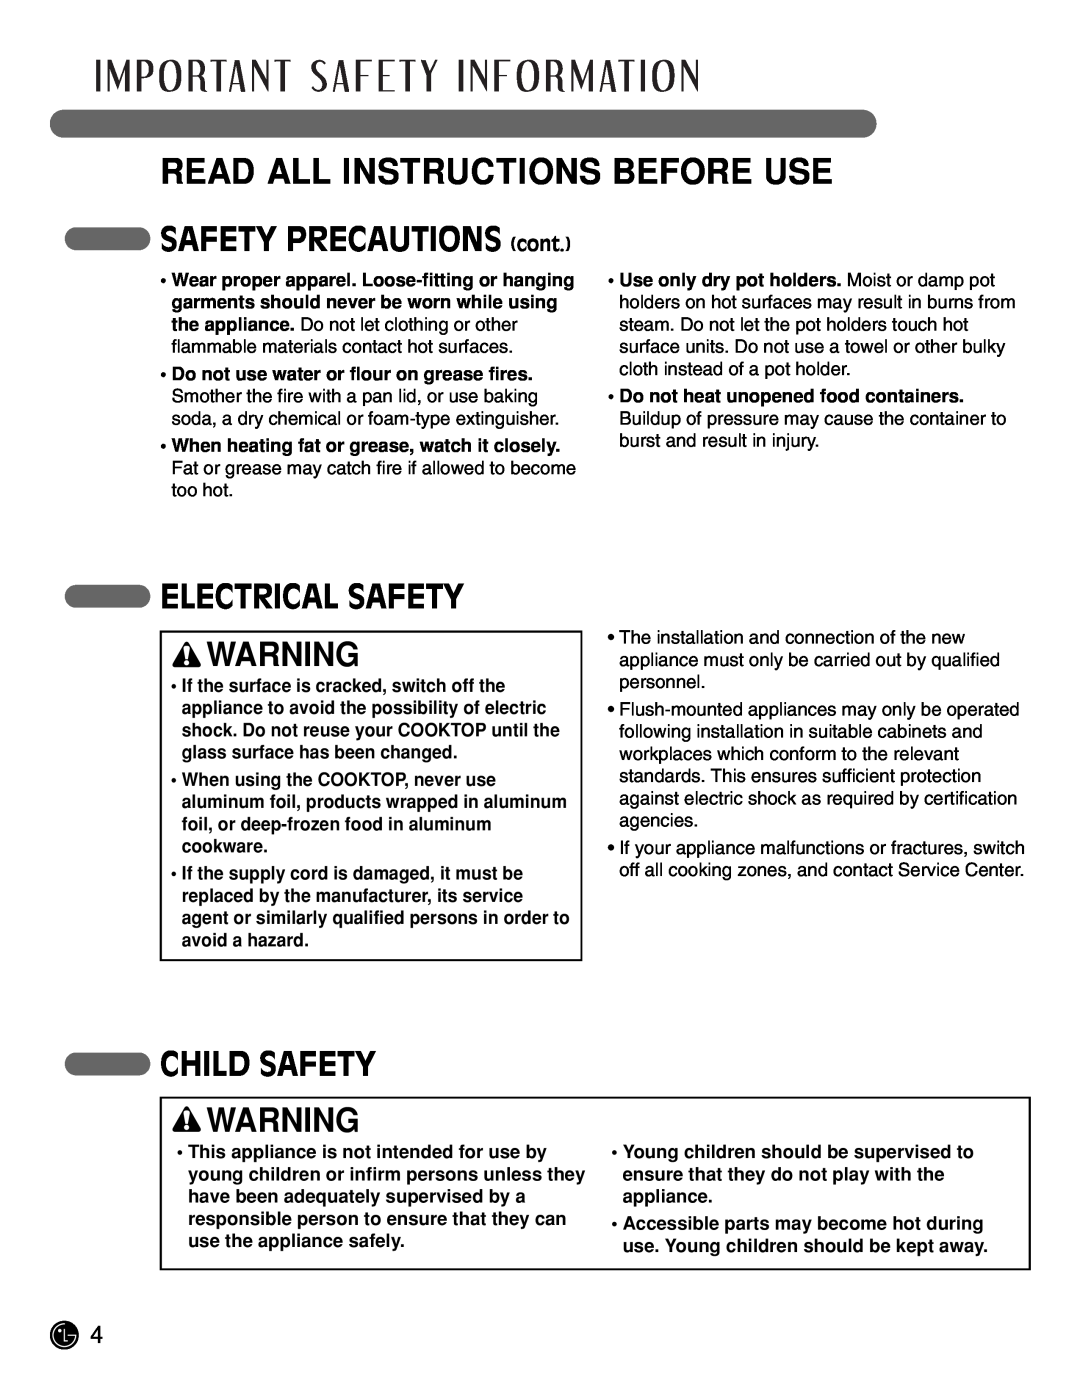 LG Electronics LCE3681ST manual SAFETY PRECAUTIONS cont, Electrical Safety, Child Safety, Read All Instructions Before Use 